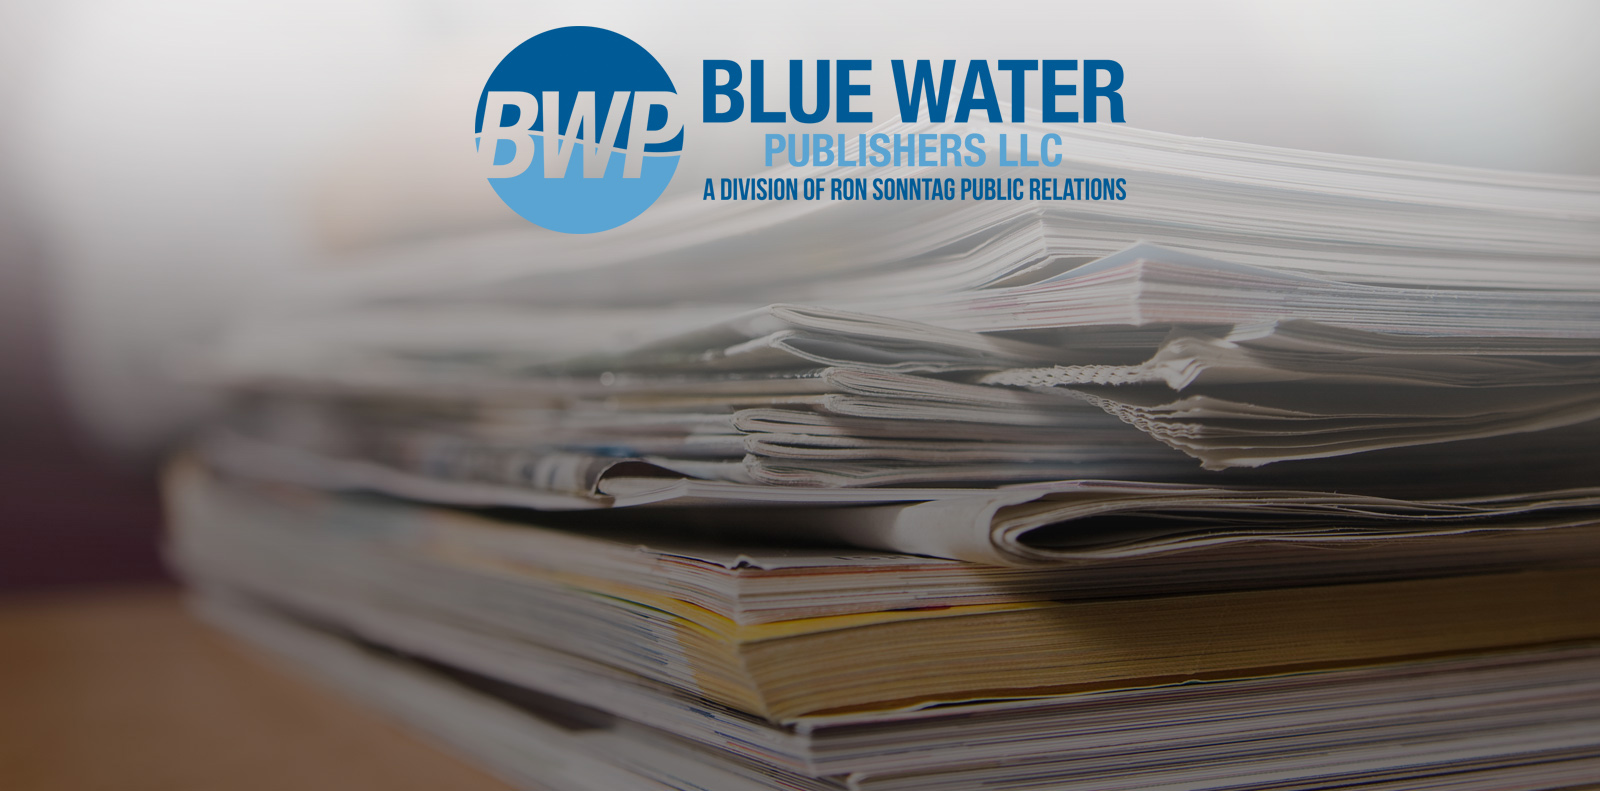 Introducing Blue Water Publishers LLC